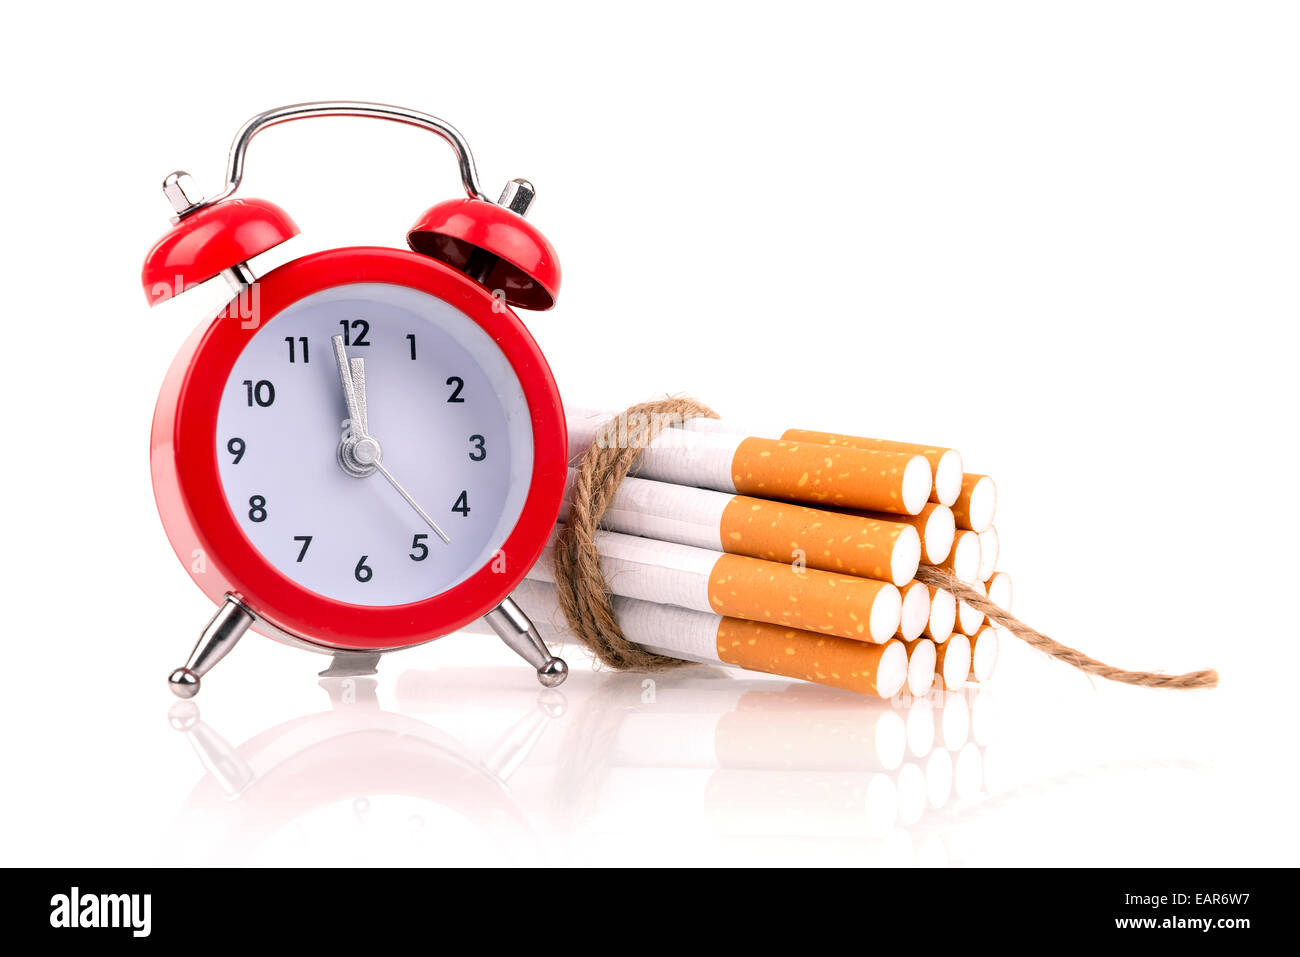 Home made bomb made with an alarm clock and cigarettes Stock Photo